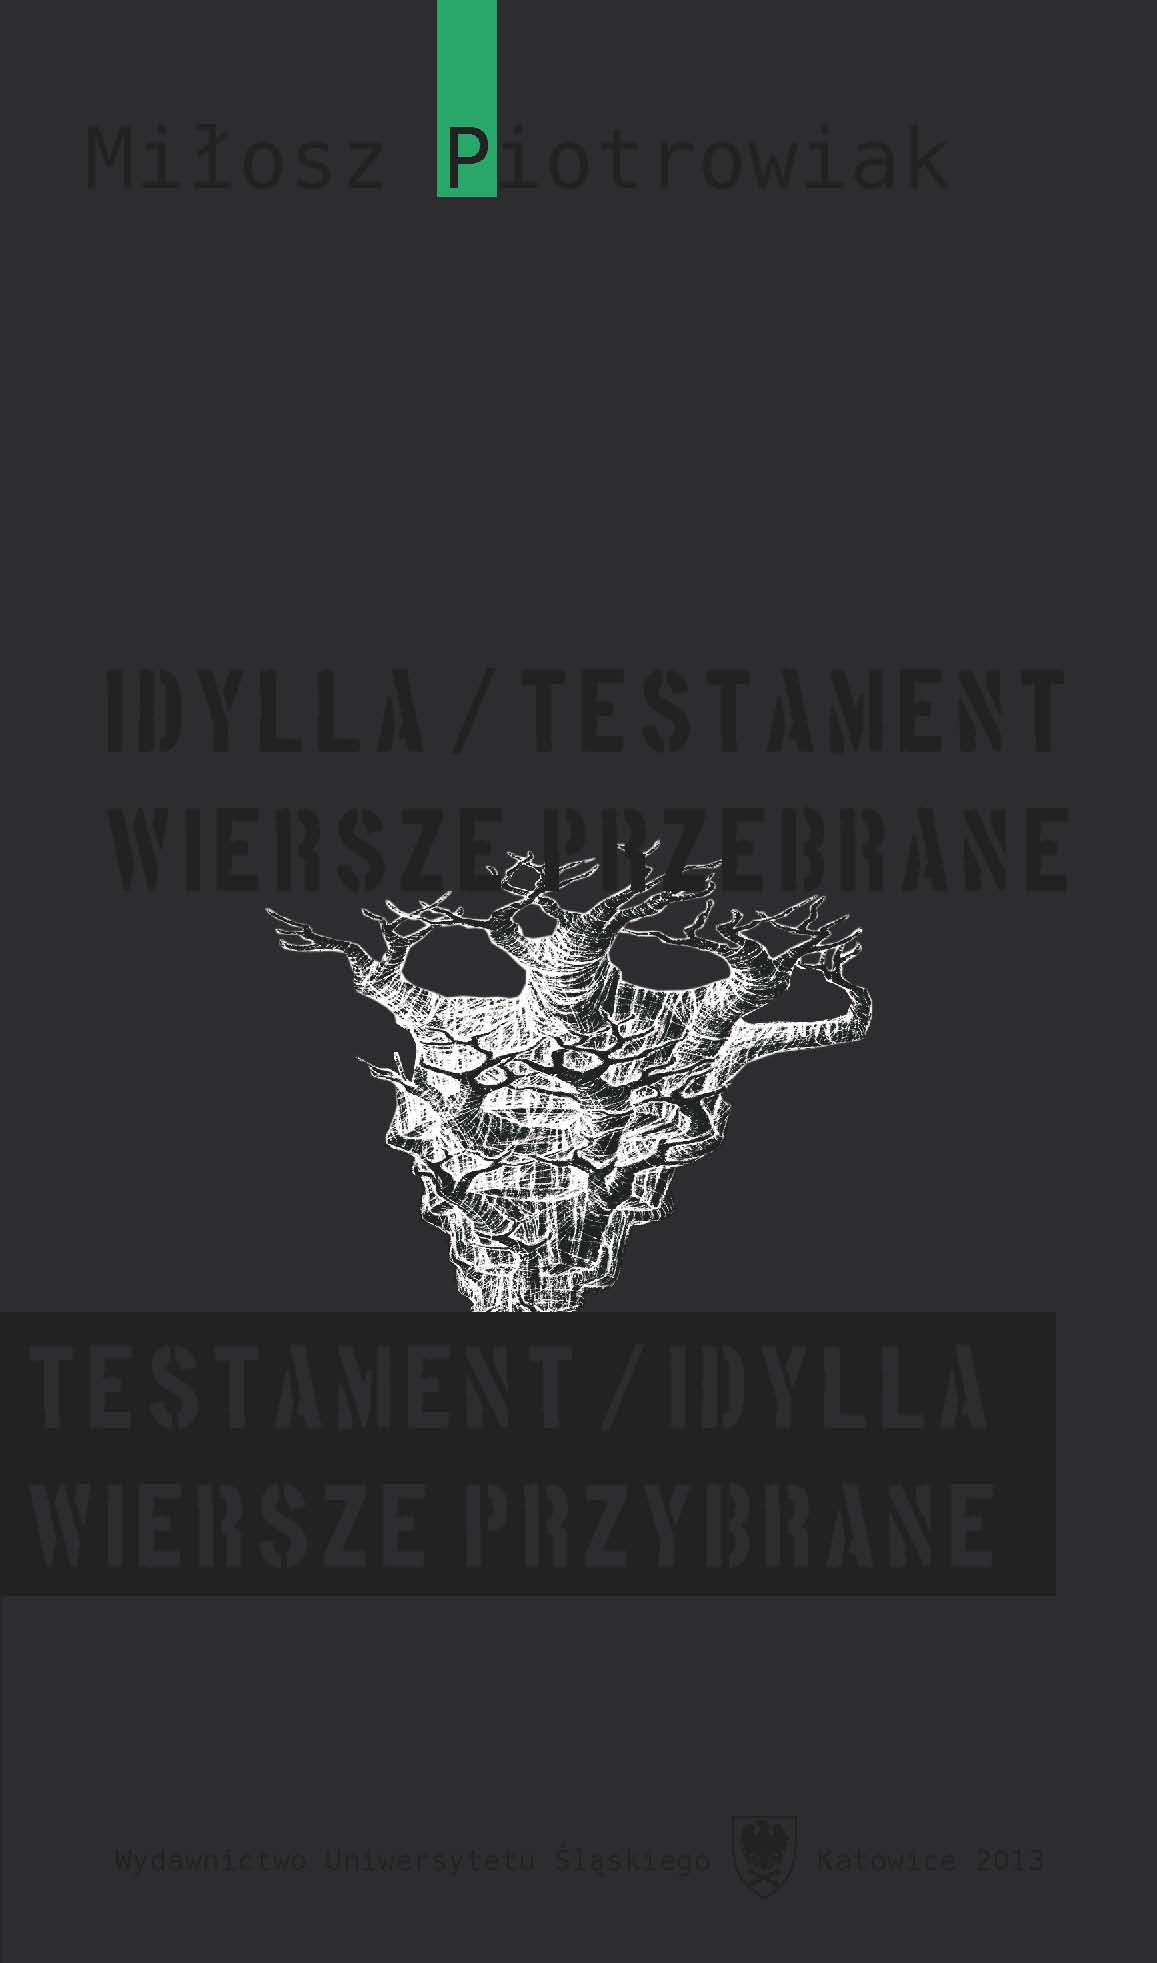 Idyll/testament. Selected poems Testament/idyll. Adopted poems Cover Image